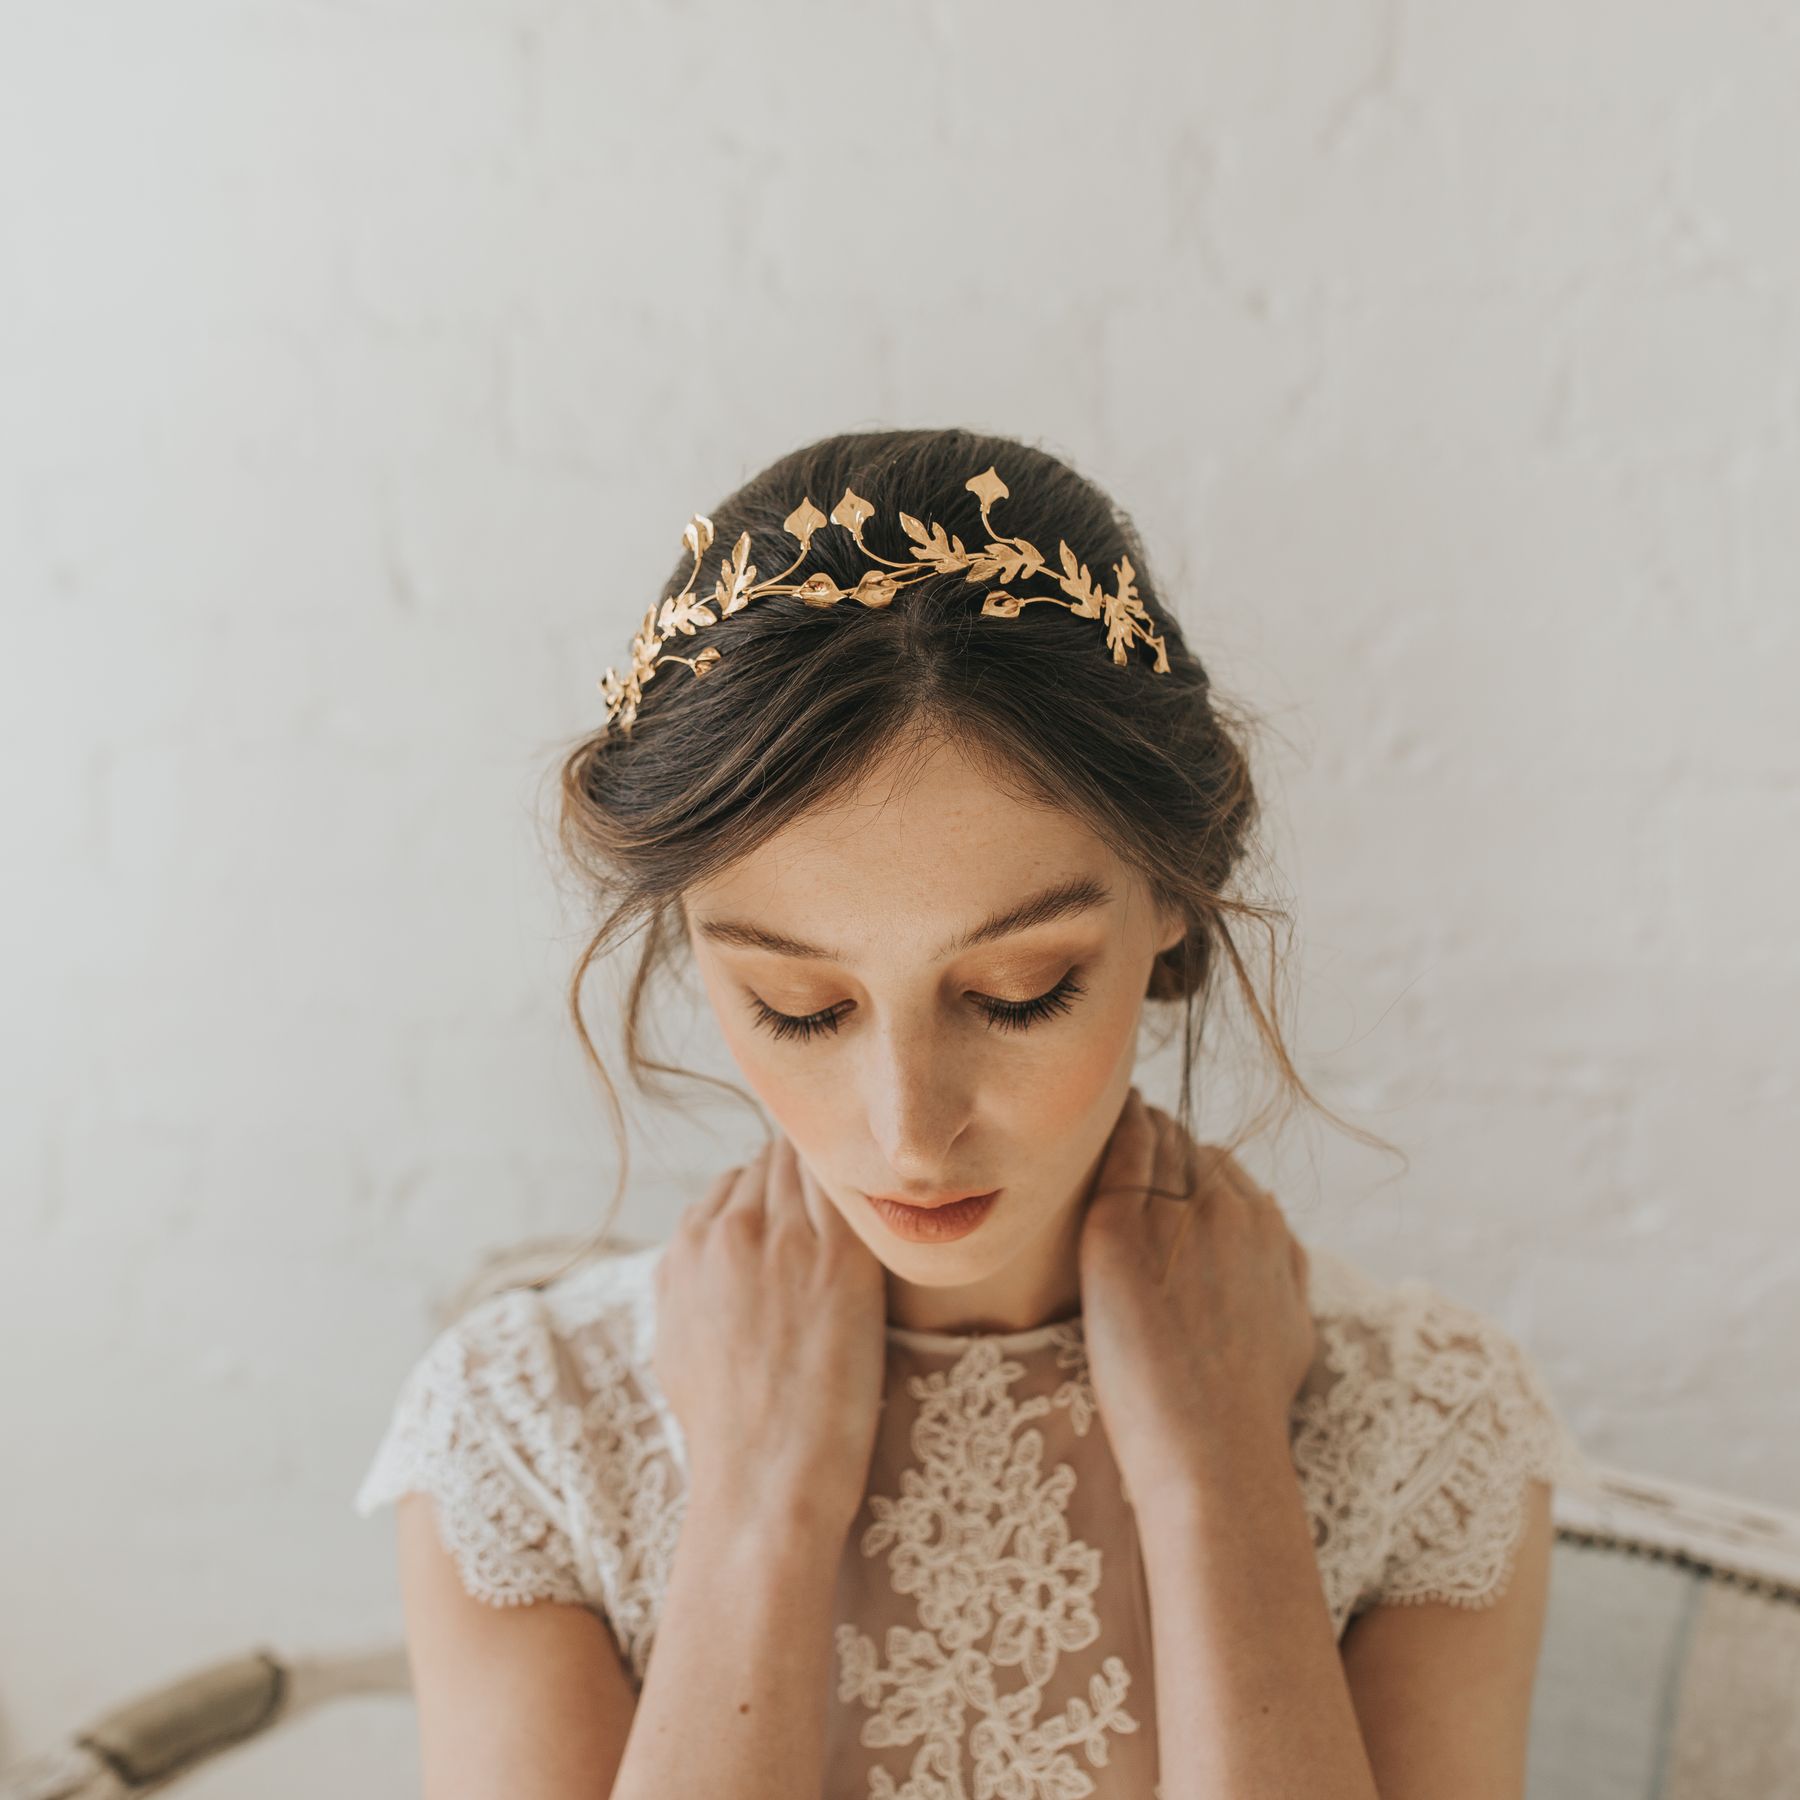 https://www.rockmywedding.co.uk/1800x1800/wp-content/gallery/liberty-in-love-1/Vega-gilded-leaves-headpiece-by-Halo-and-Co-at-Liberty-in-Love-%C2%A3205____.JPG?fit=1